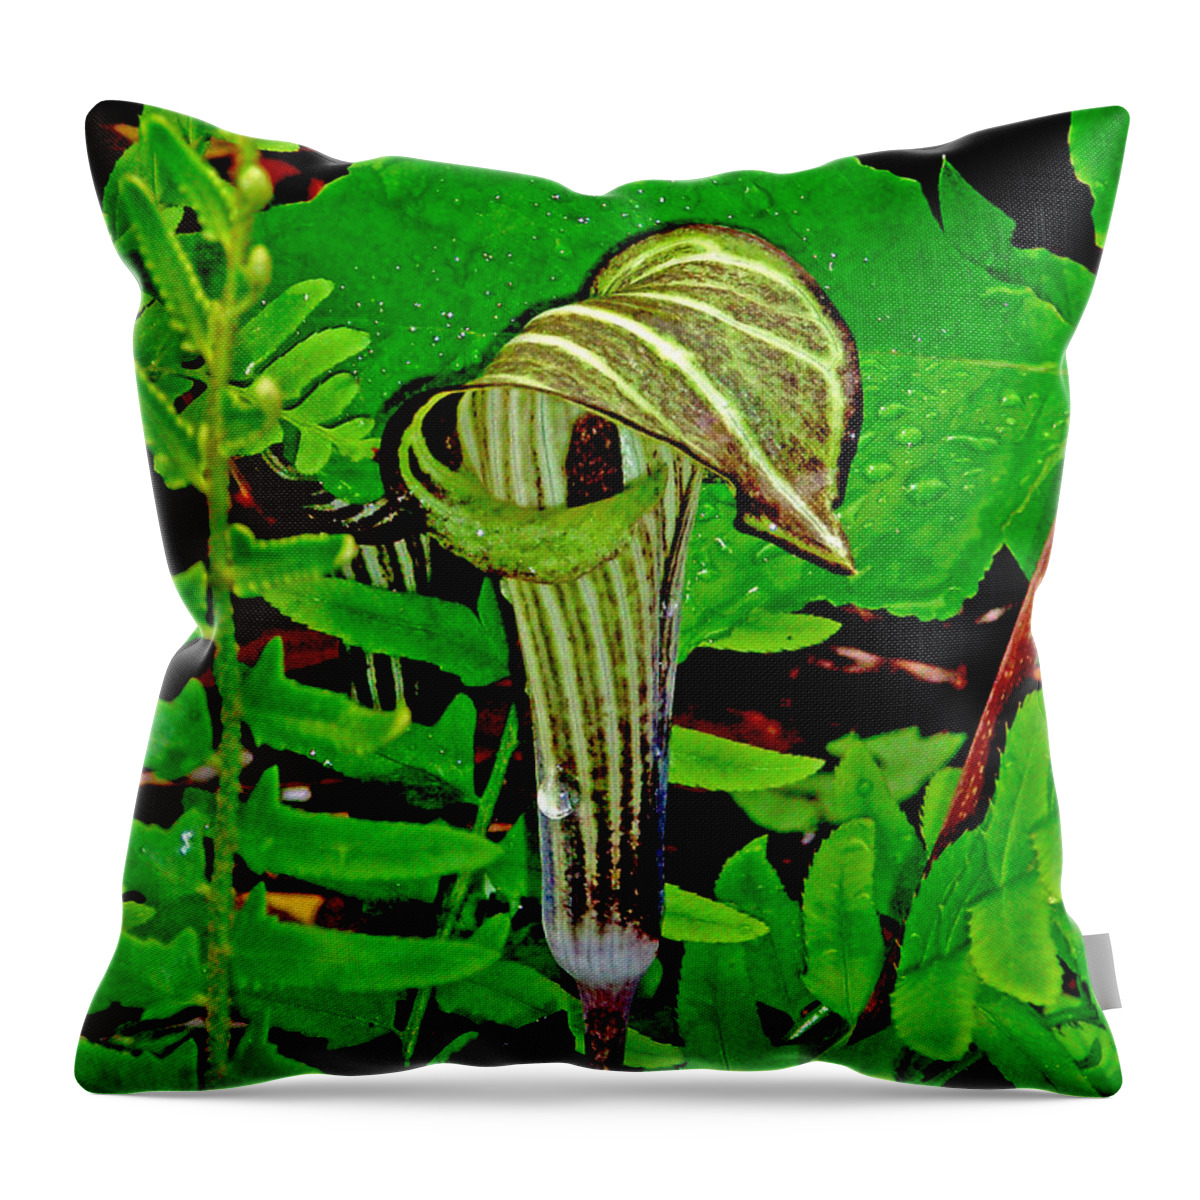 Plant Throw Pillow featuring the photograph Jack-in-the-Pulpit by Allen Nice-Webb